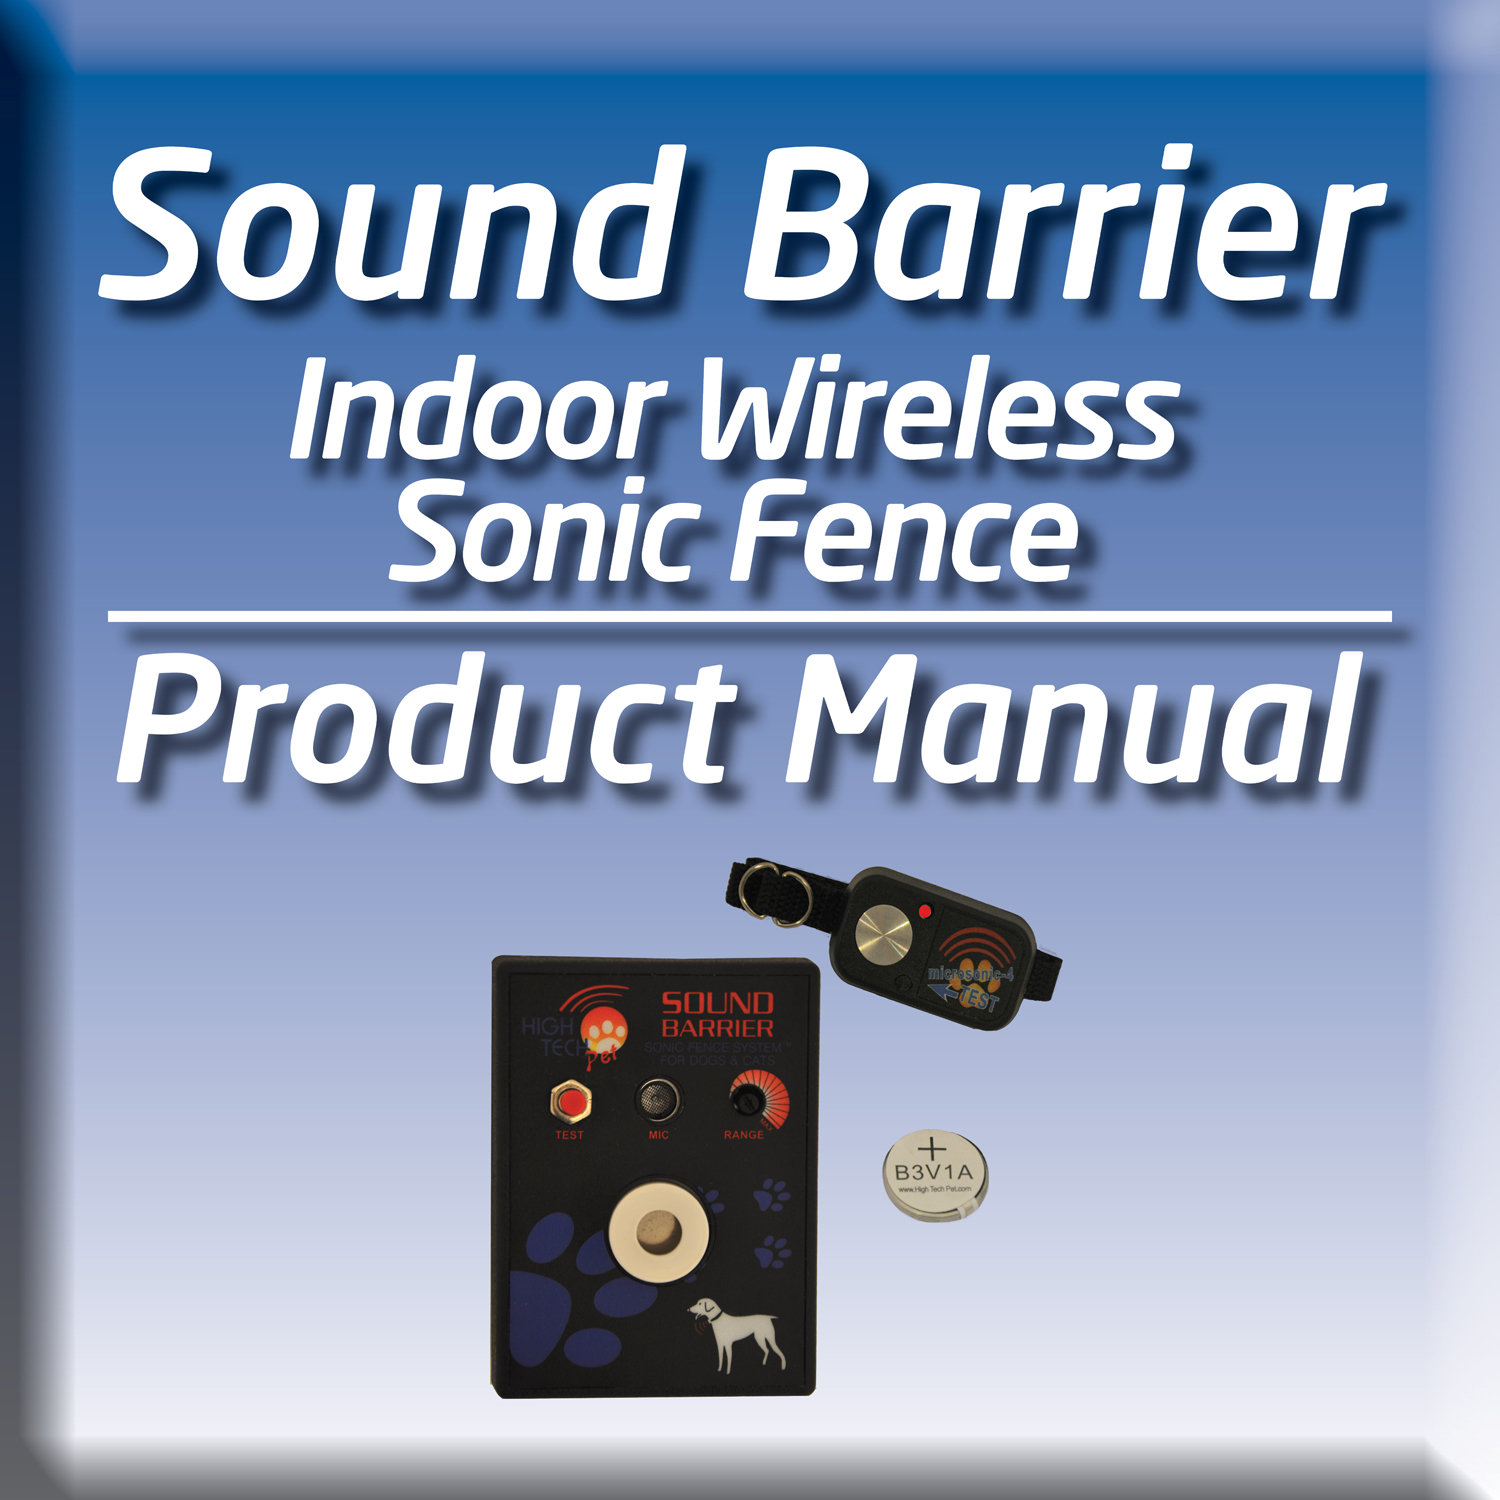 Our sound barrier and yard barrier come with this amazing electric dog fence